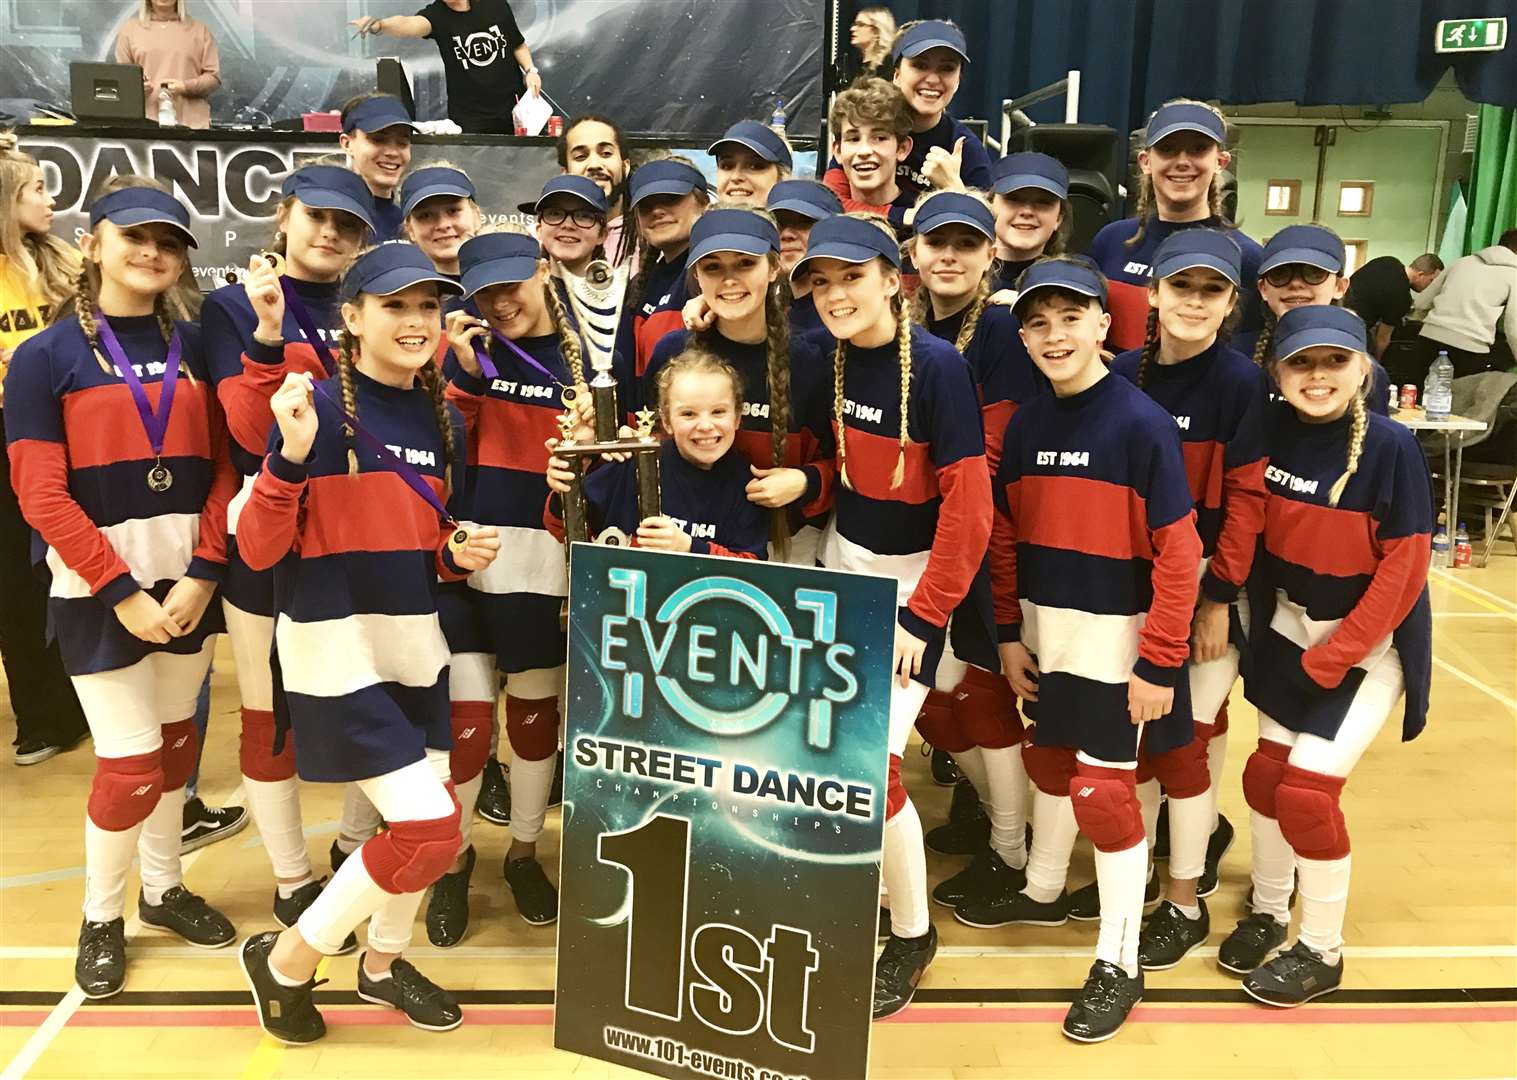 The dance school had three wins at the event